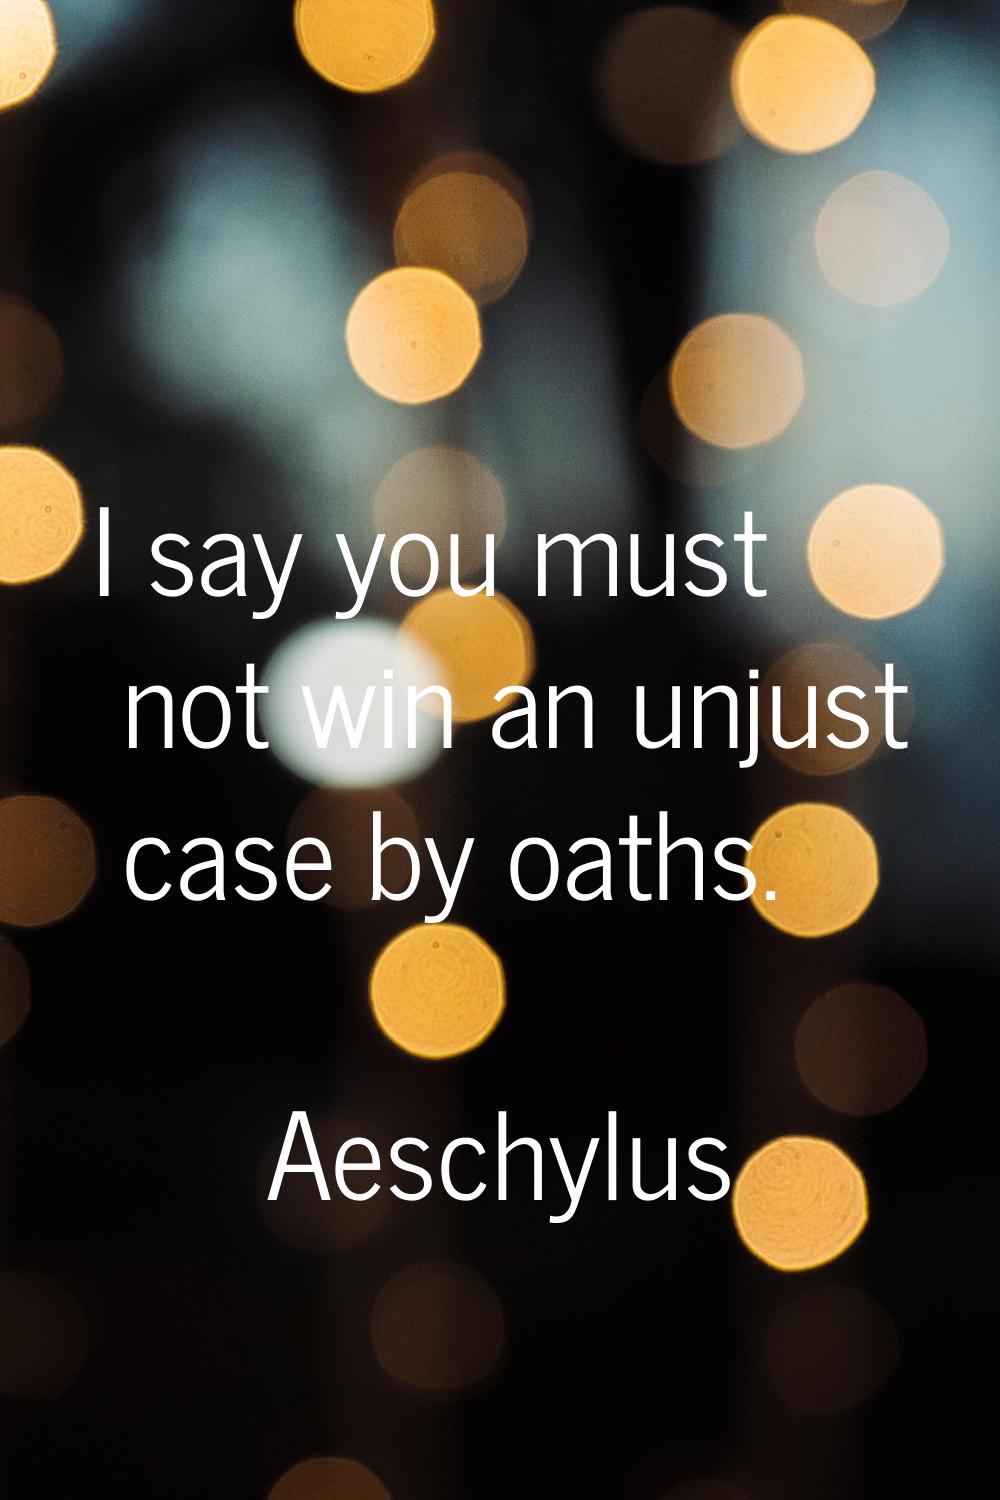 I say you must not win an unjust case by oaths.